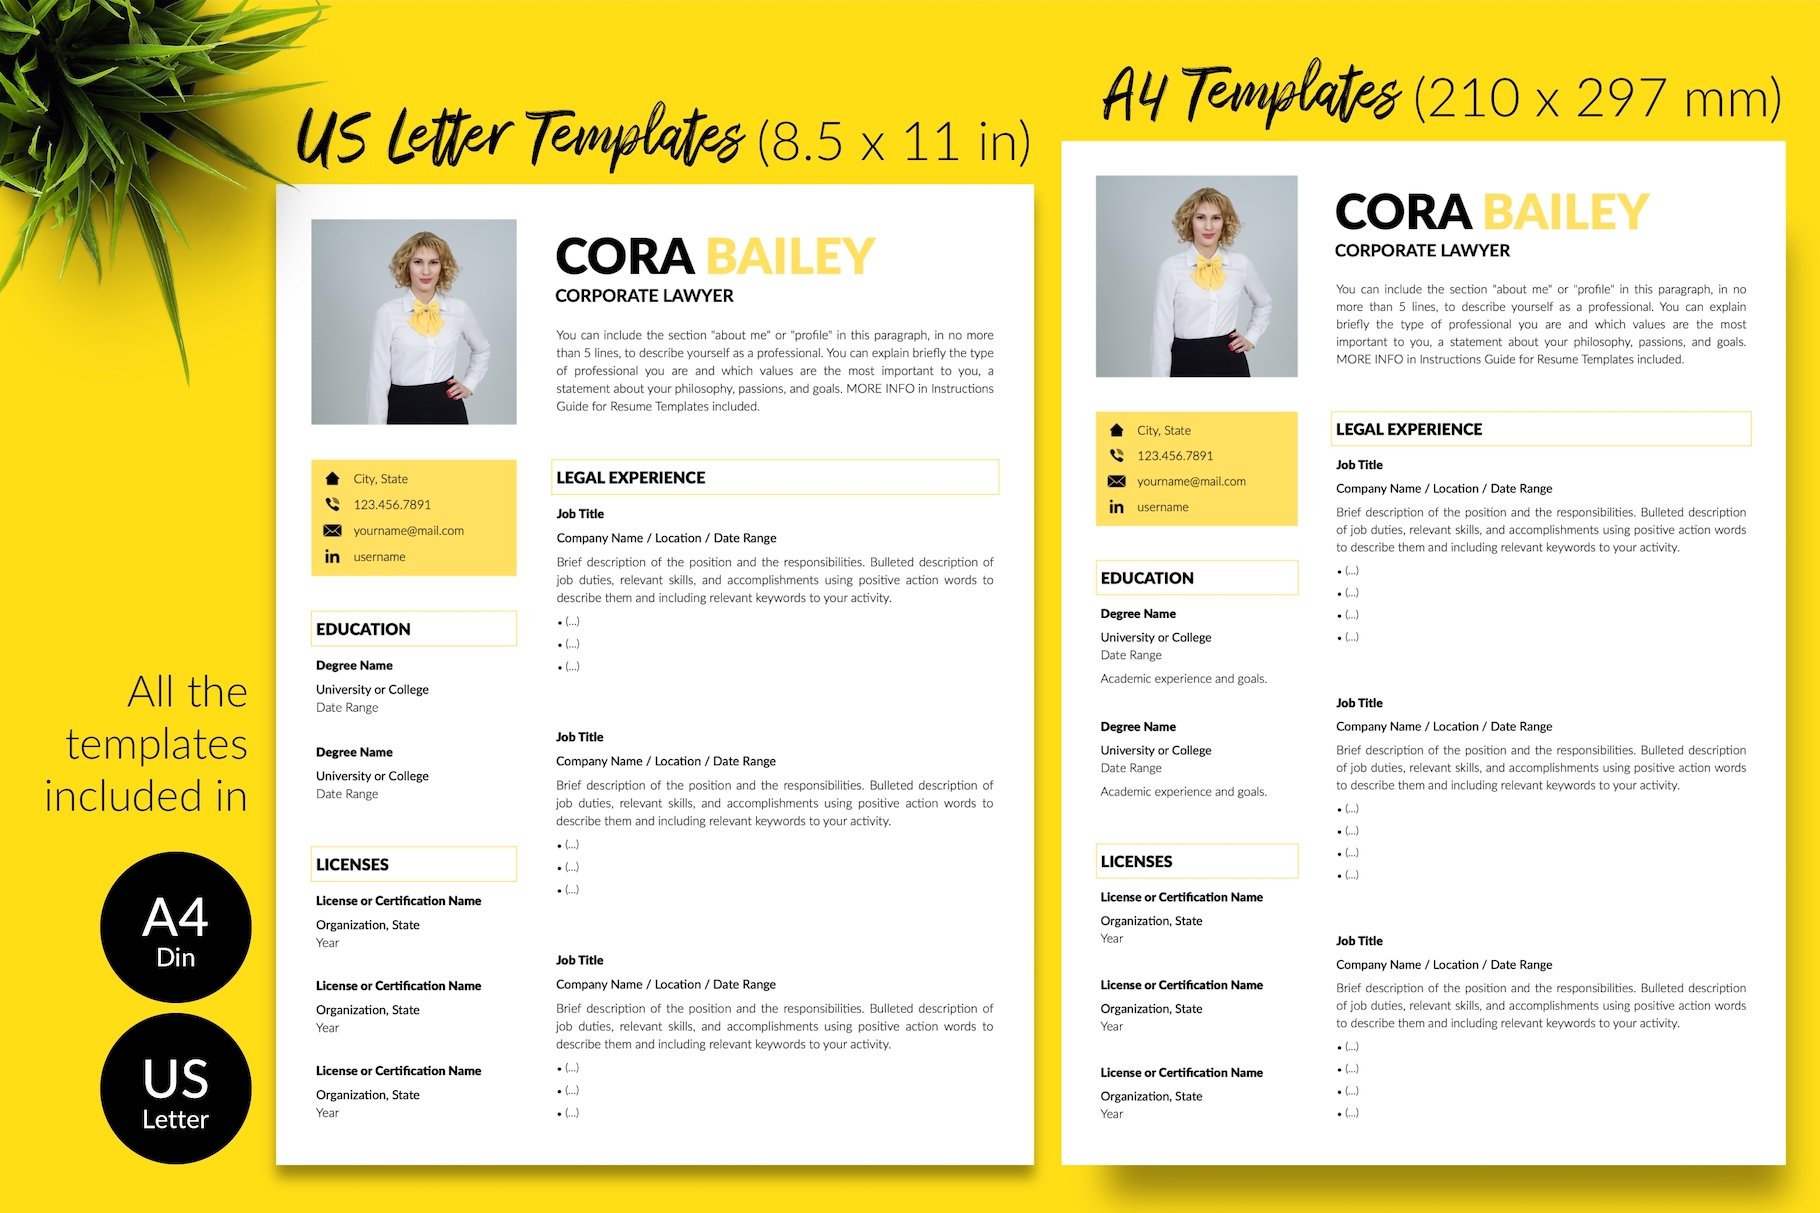 resume cv template cora bailey for creative market 08 size din a4 us letter 838